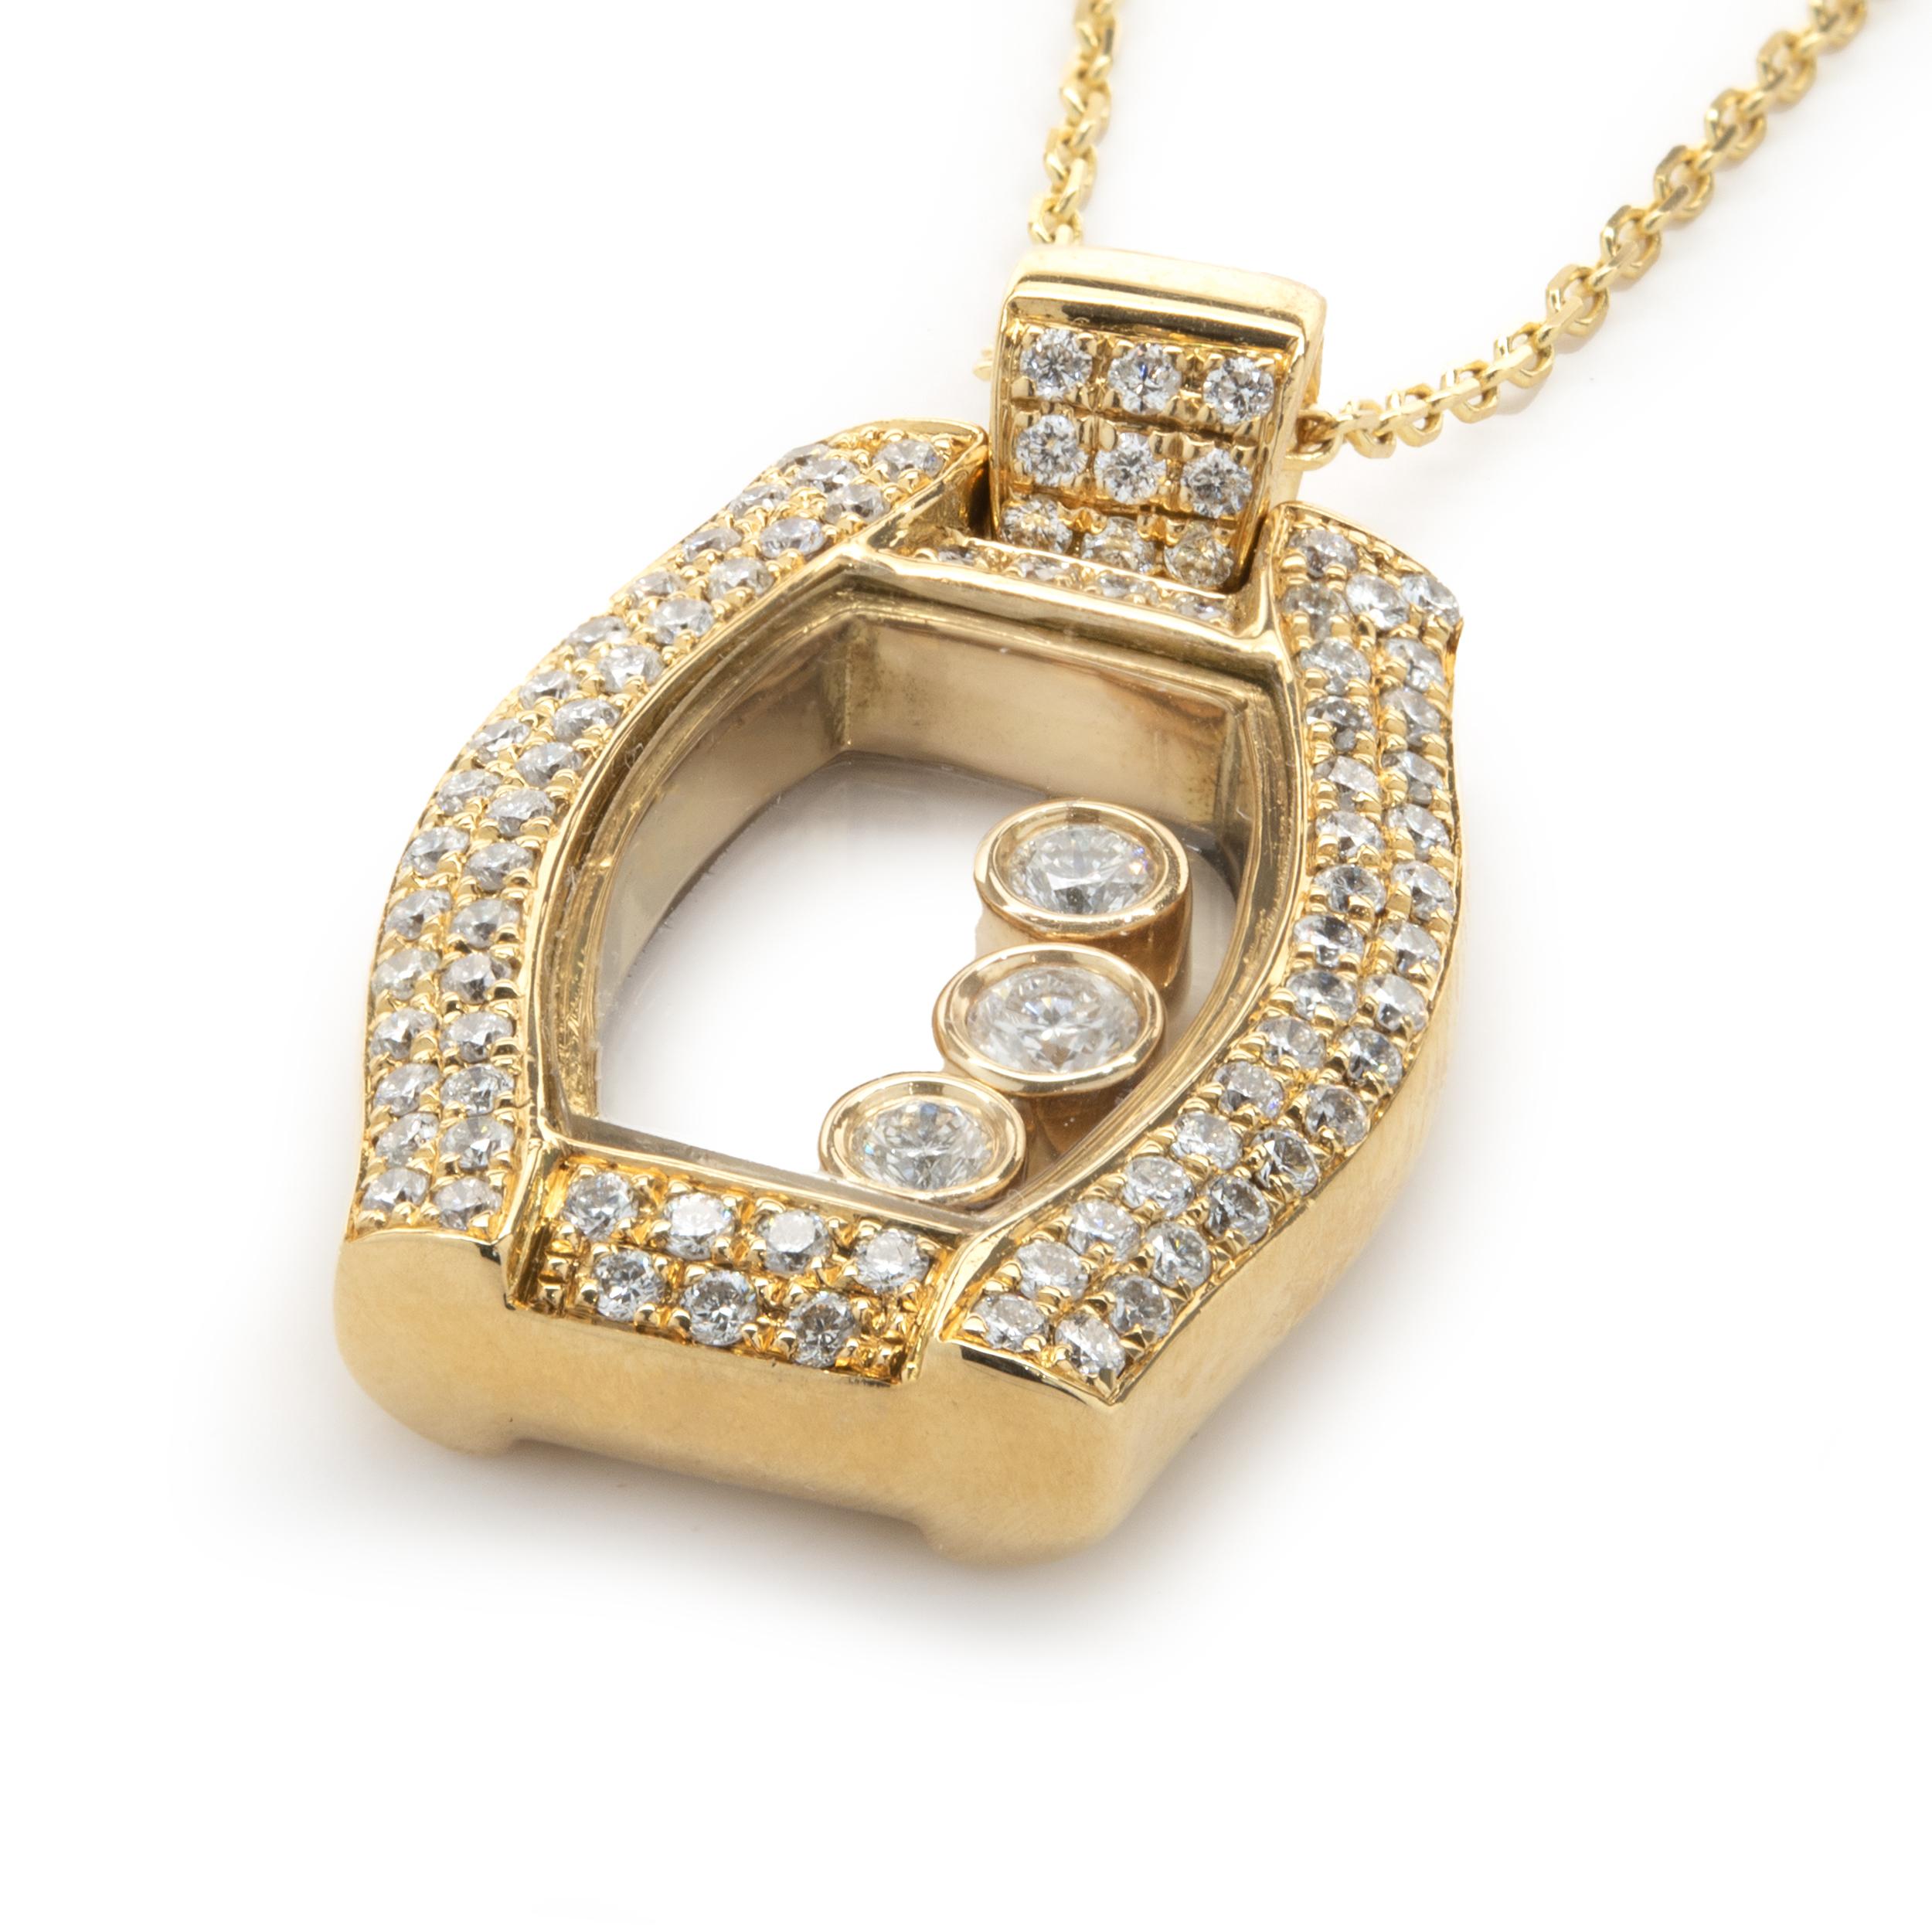 18 Karat Yellow Gold Pave Diamond Floating Diamond Necklace In Excellent Condition For Sale In Scottsdale, AZ